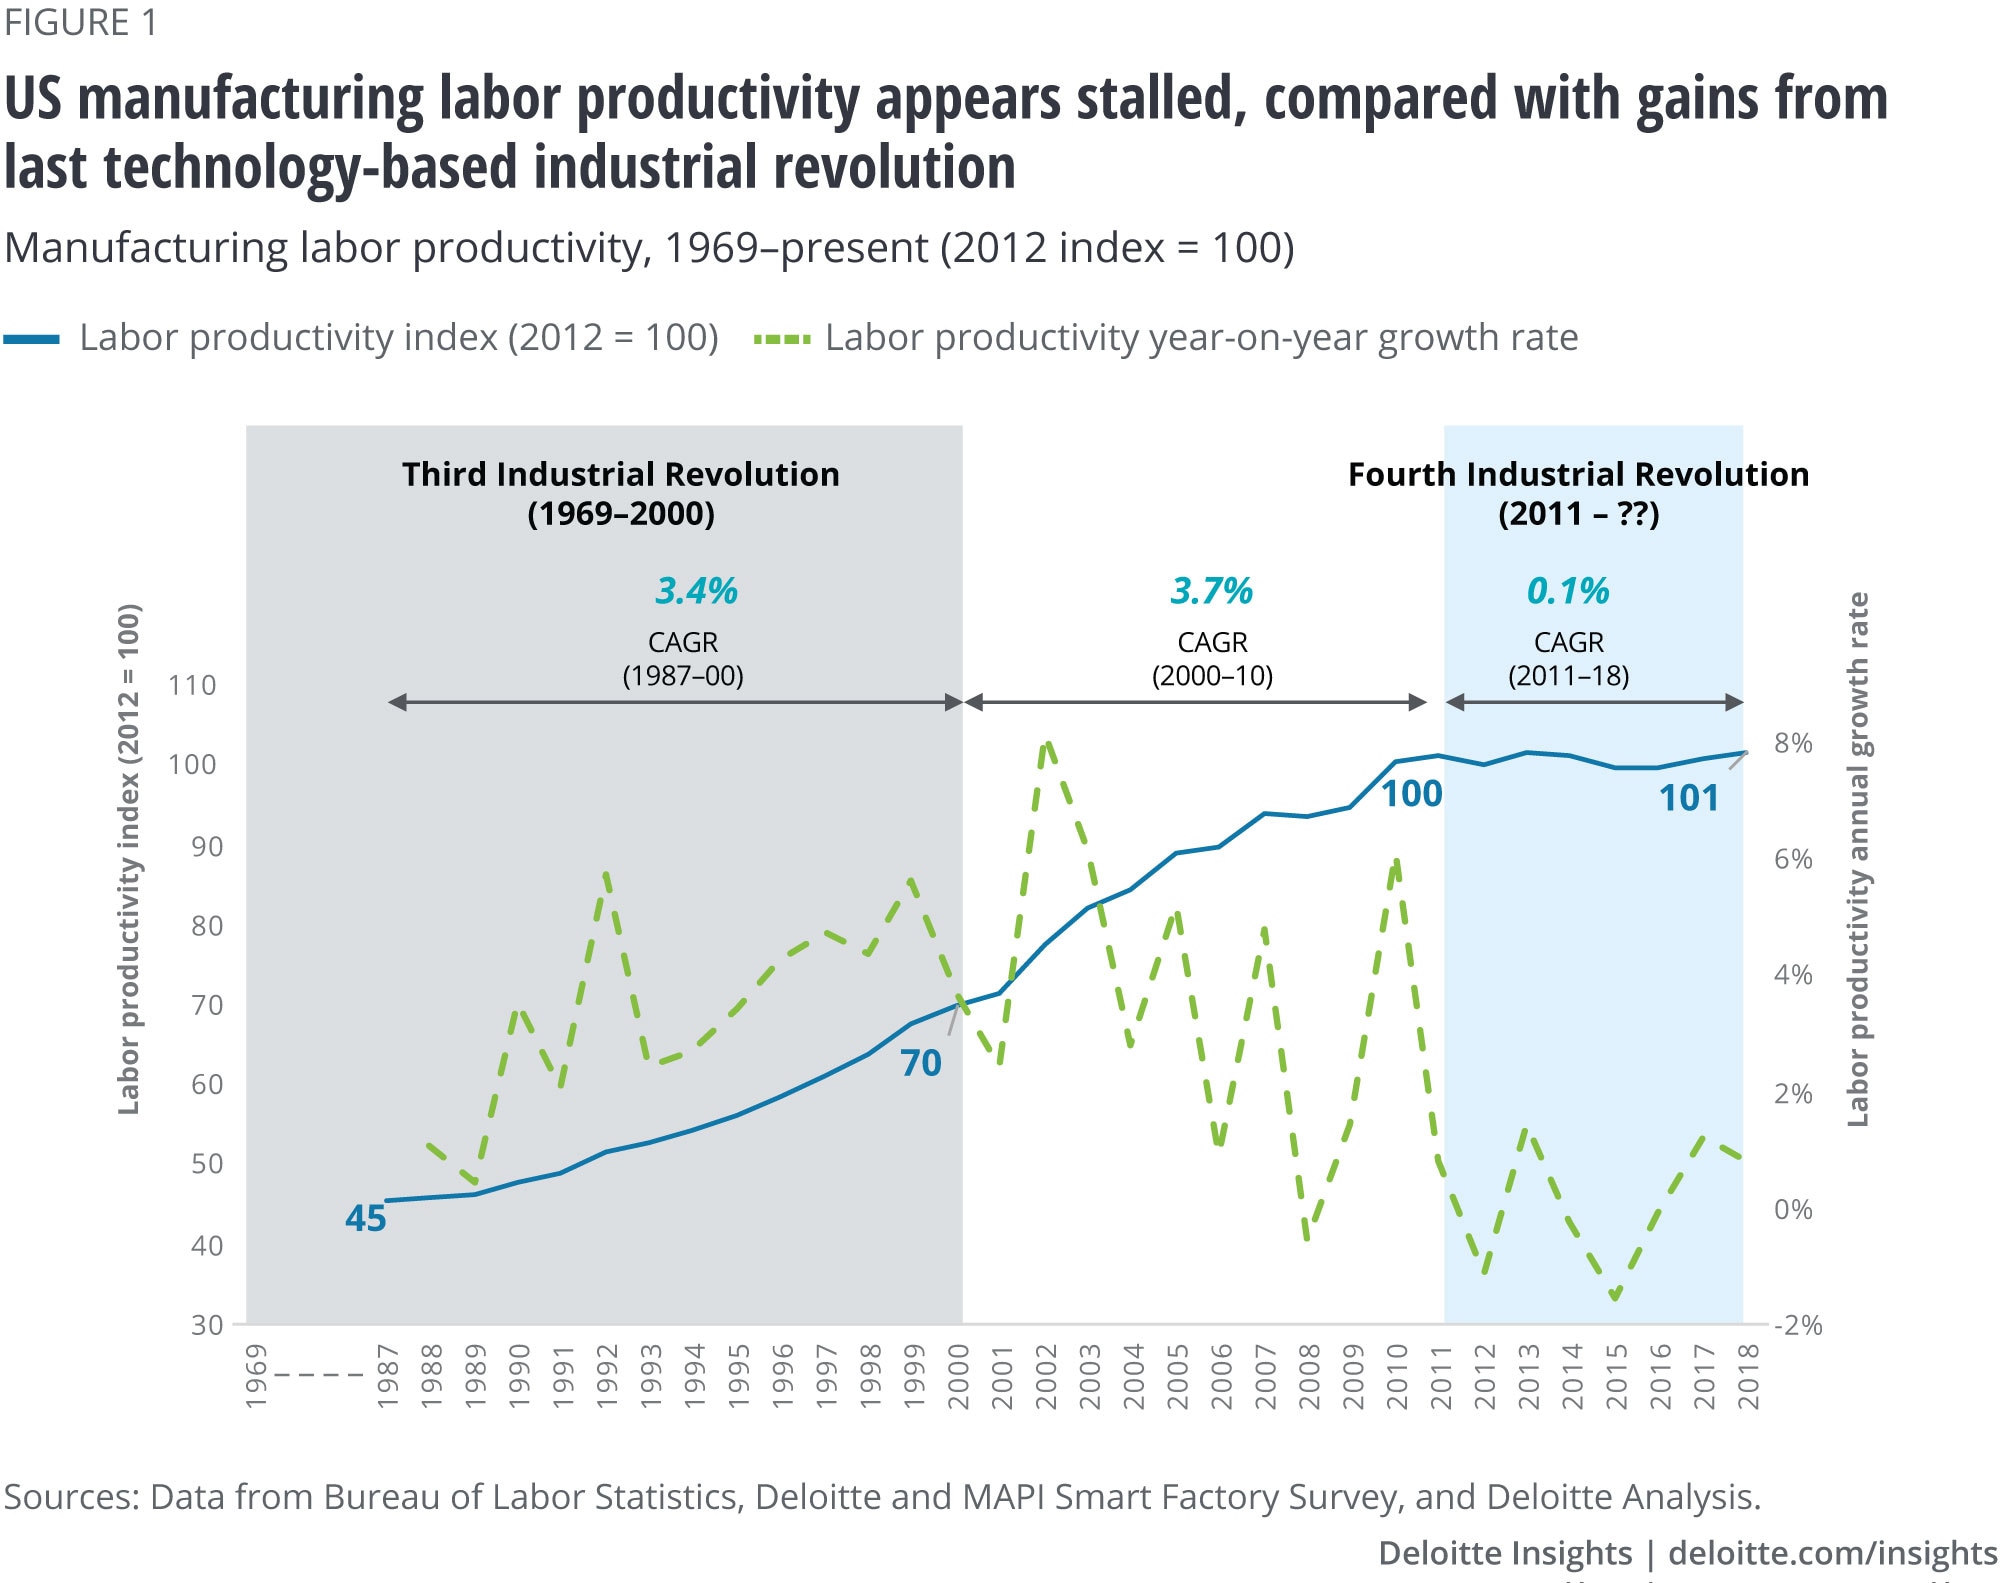 US manufacturing labor productivity appears stalled, compared with gains from last technology-based industrial revolution